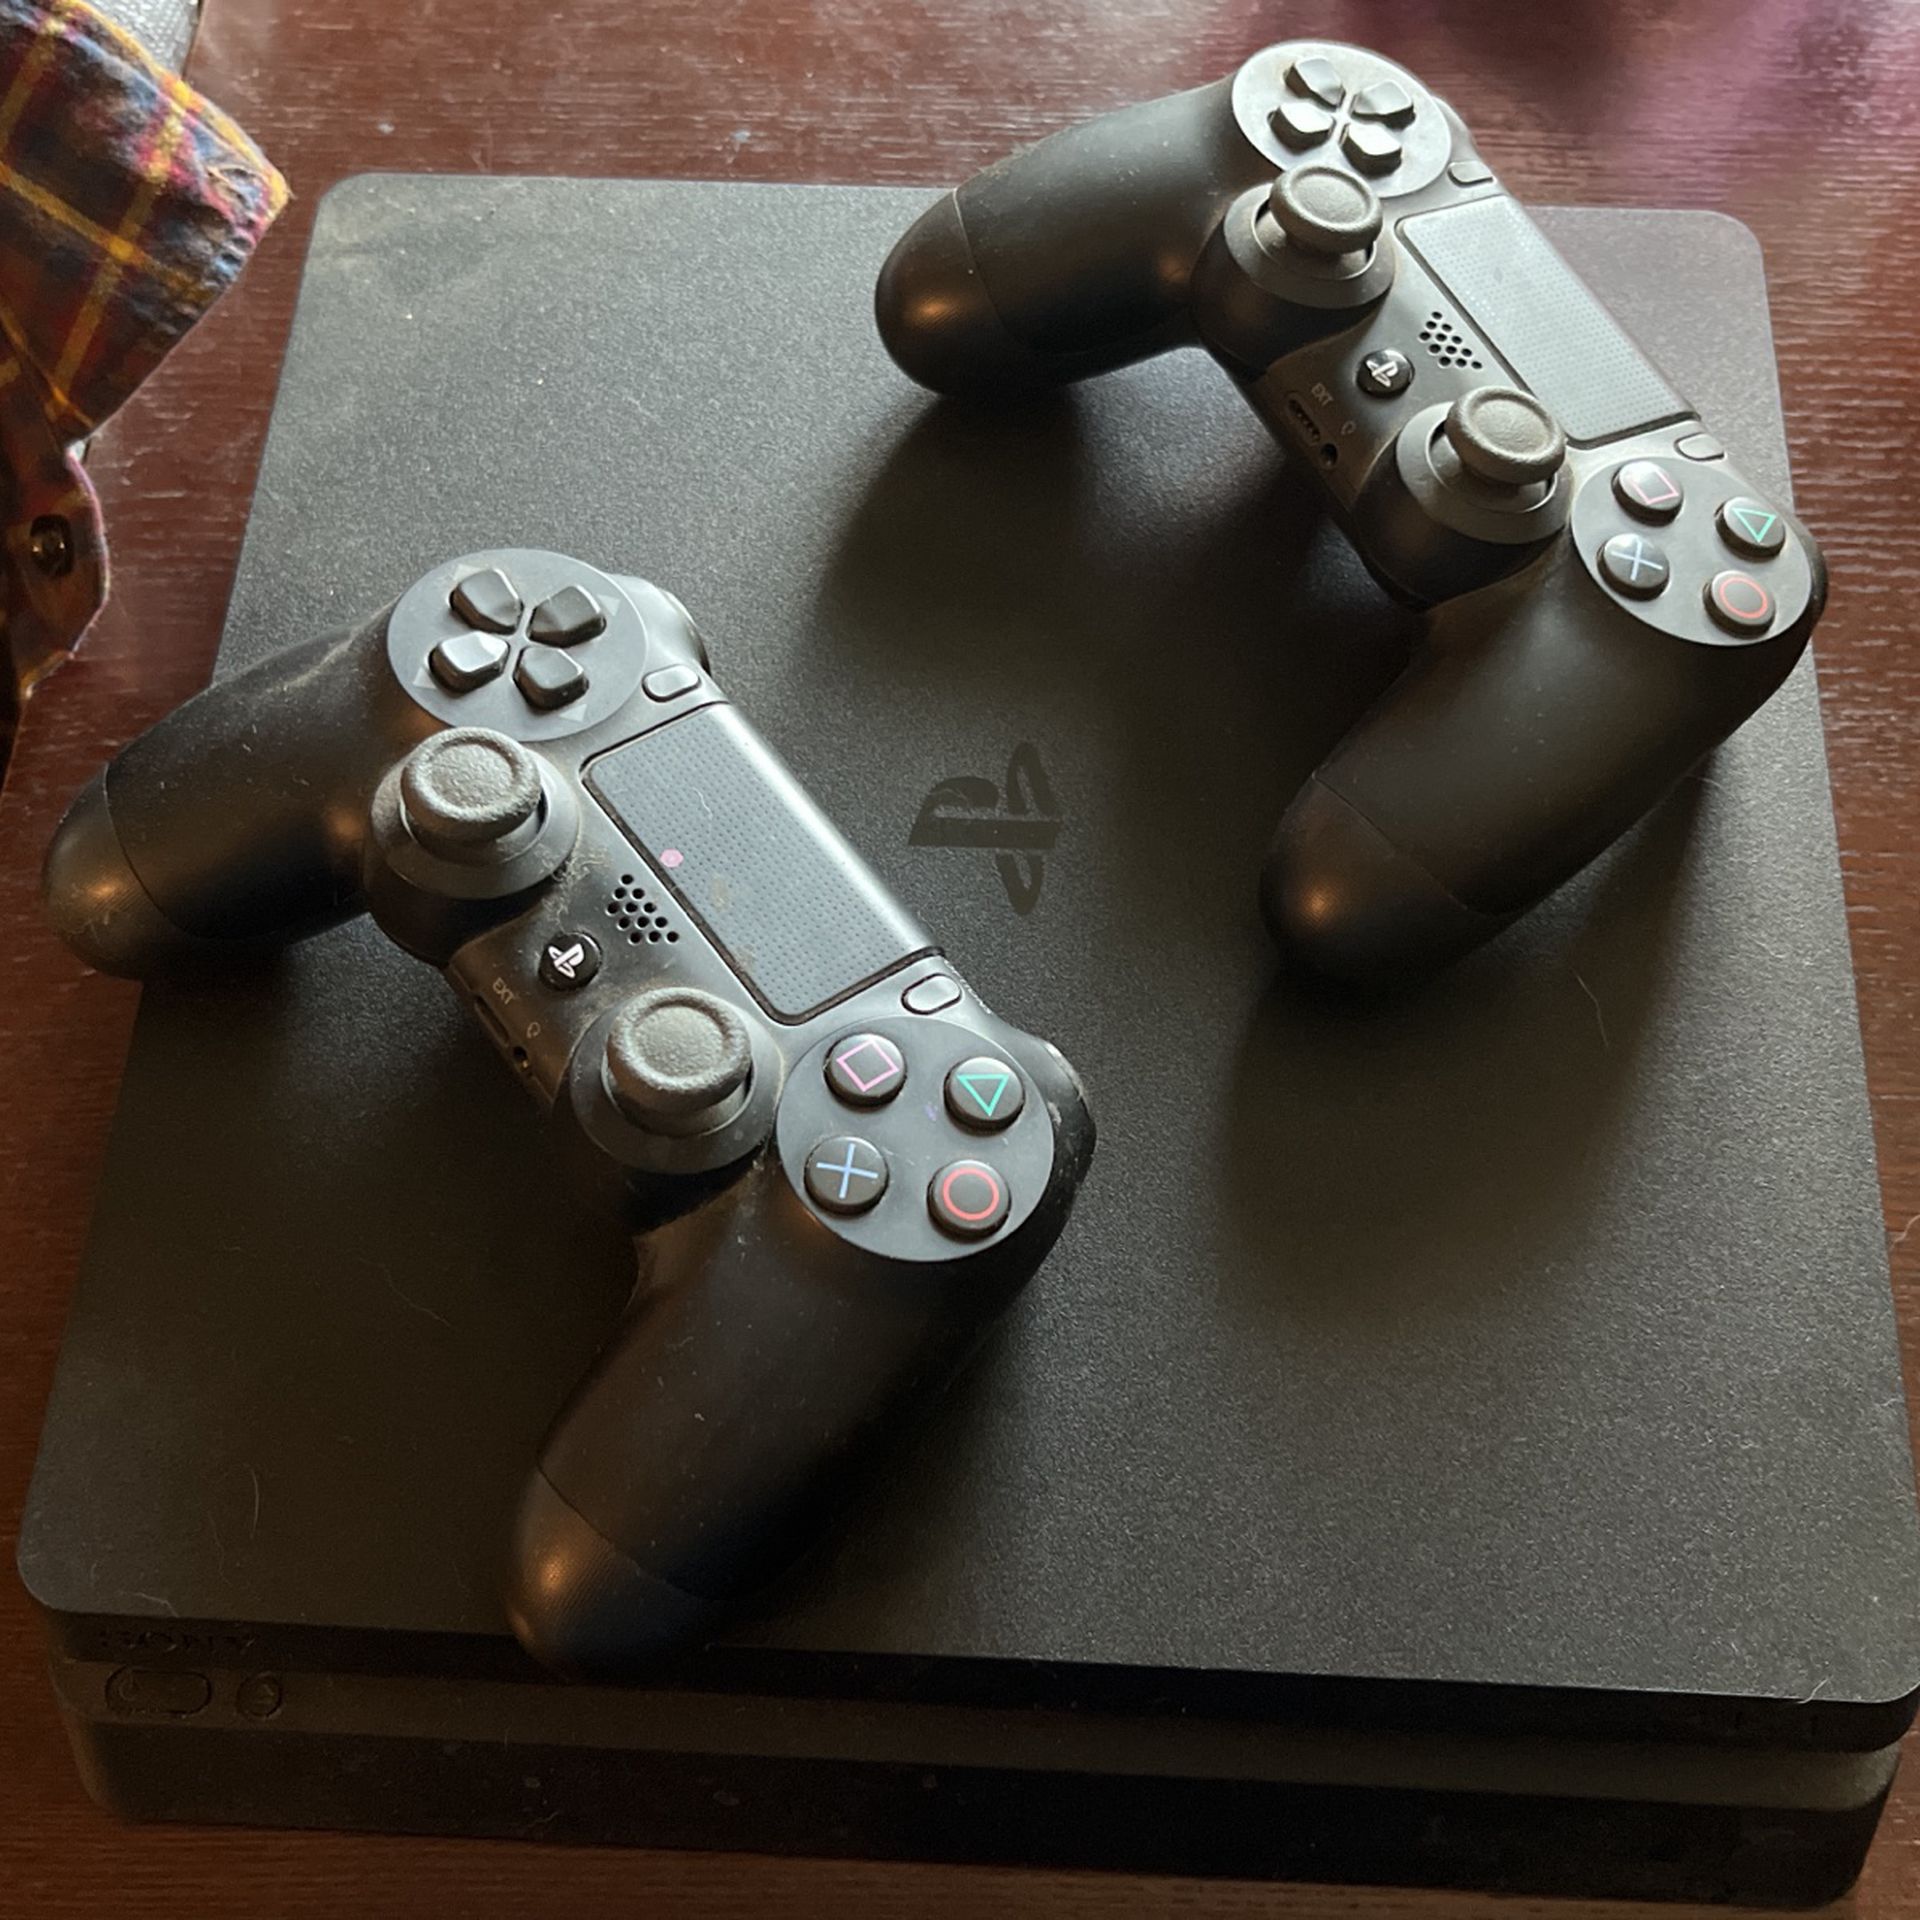 PS4 Slim + 2 Controllers